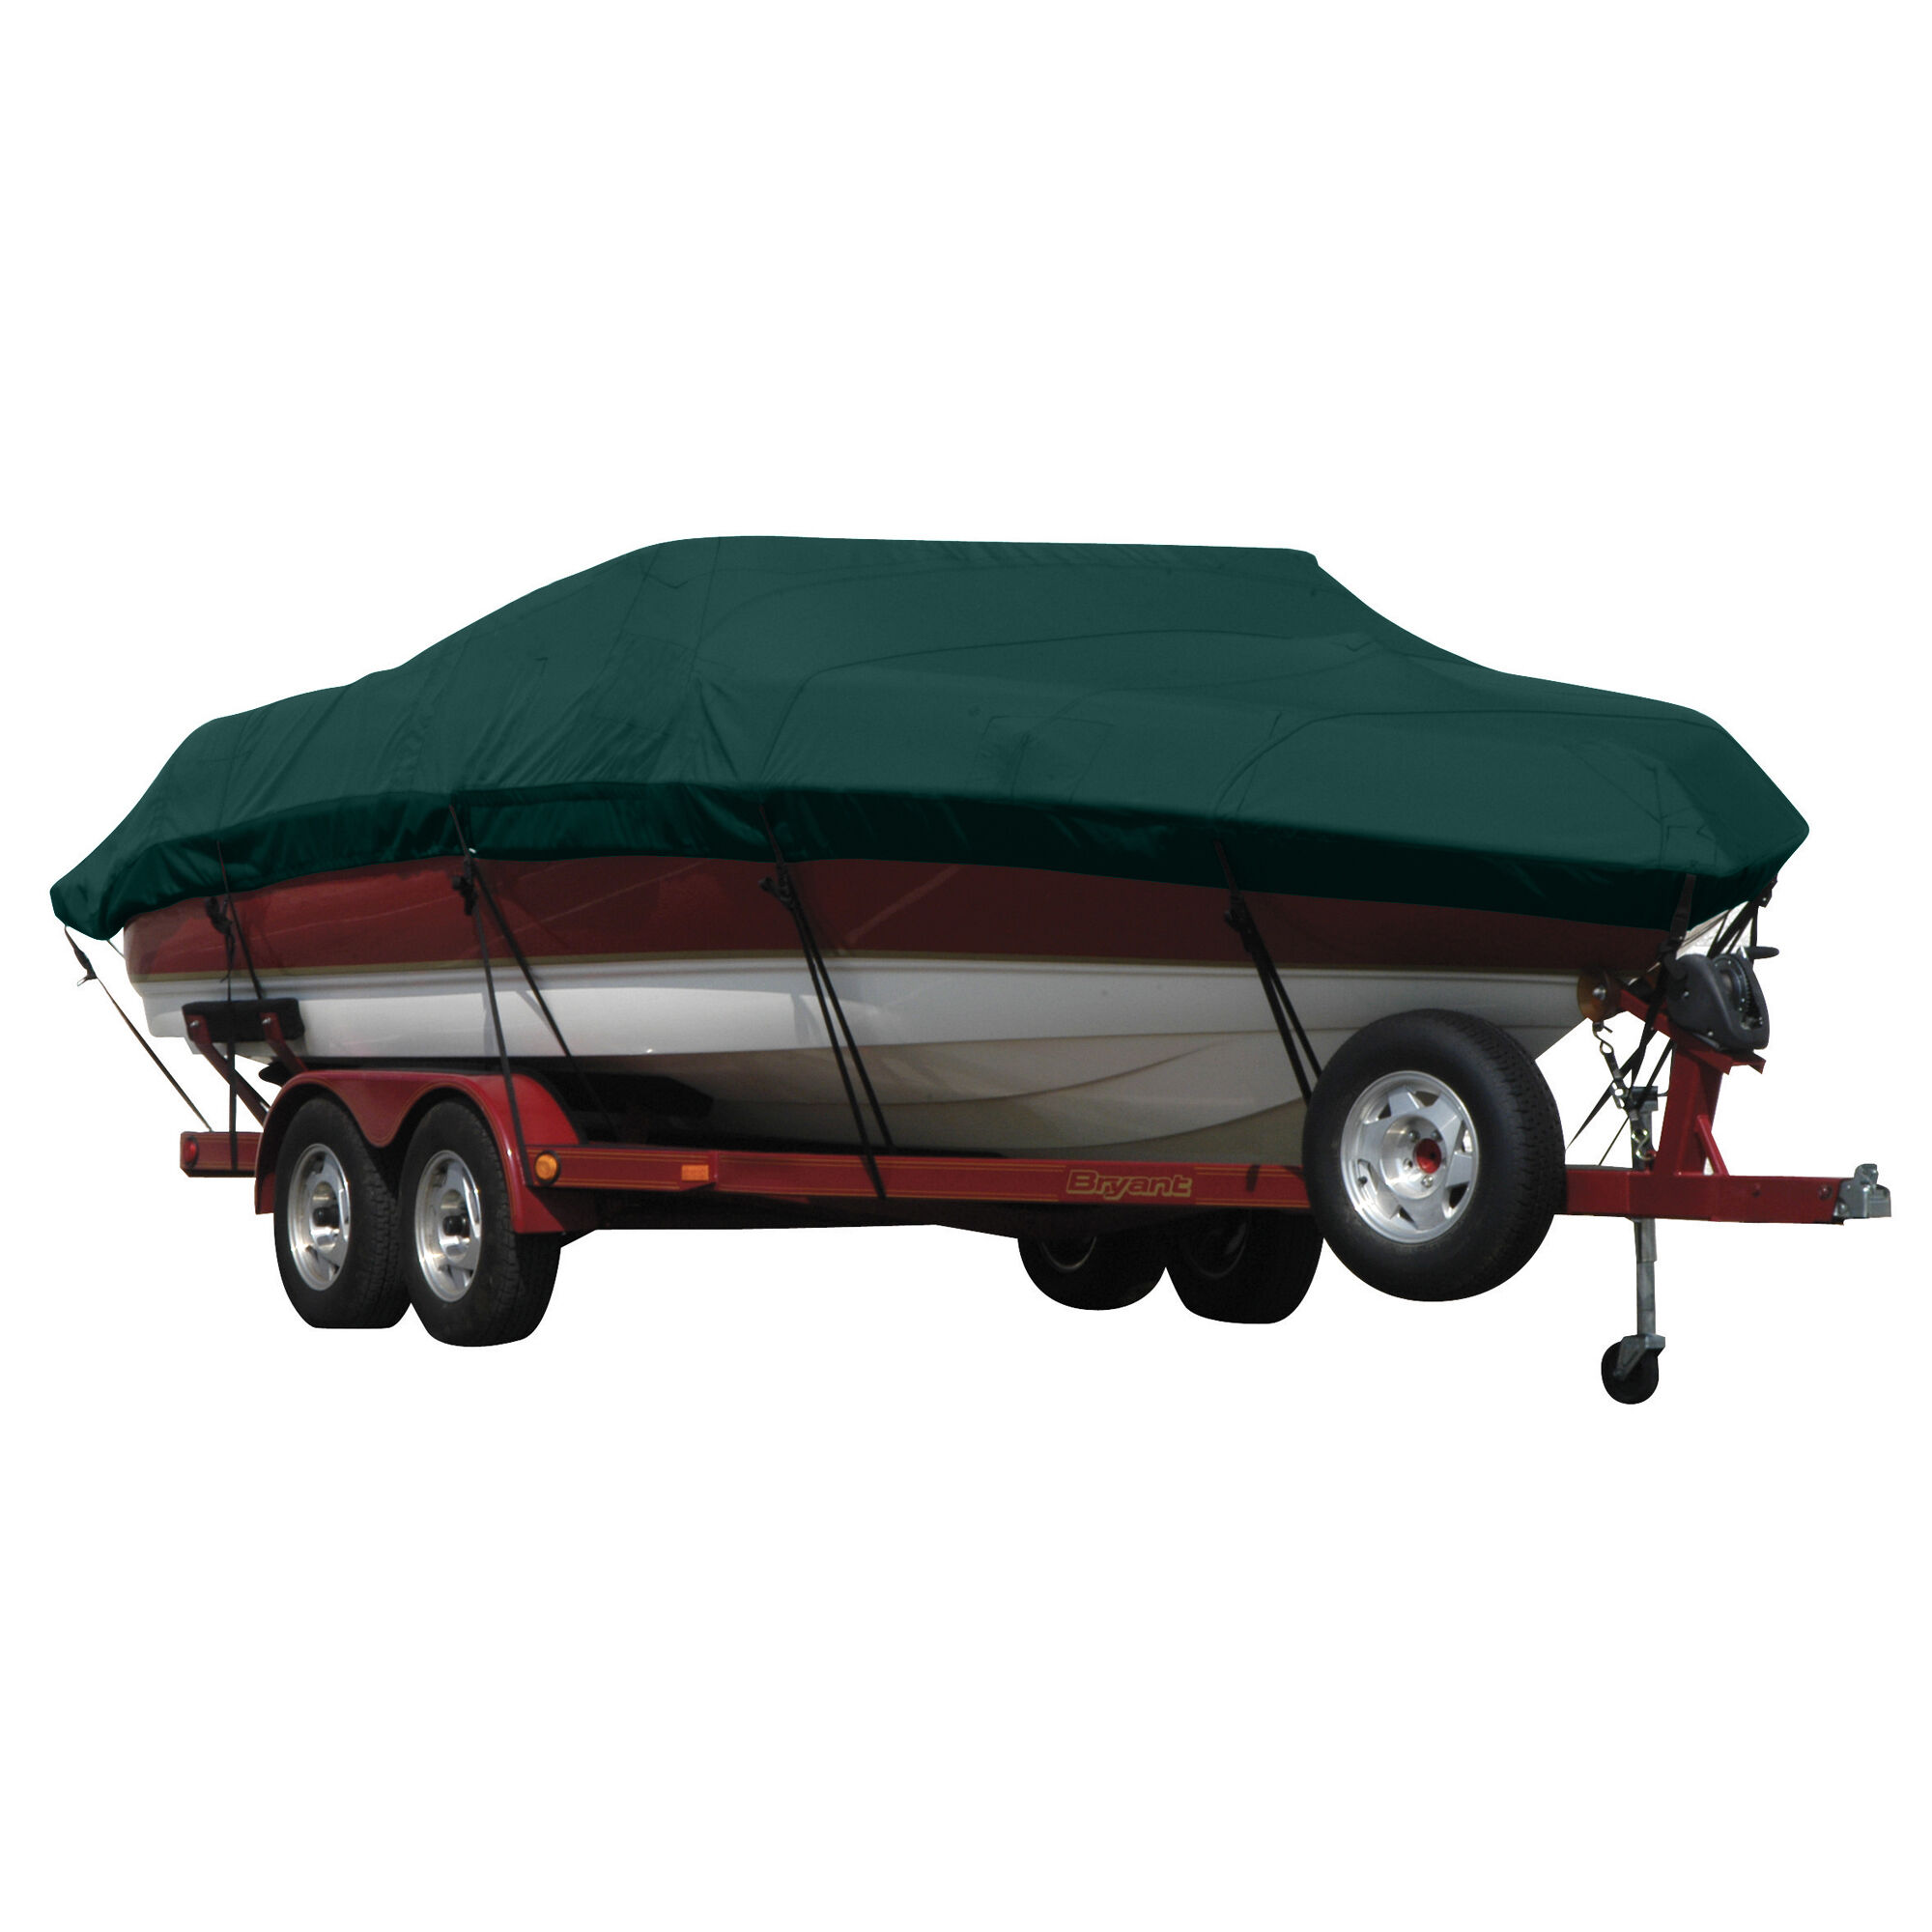 Covermate Exact Fit Sunbrella Boat Cover for Campion Chase 580 Zri/Zricd Chase 580 Zri/Zricd I/O. Forest Green